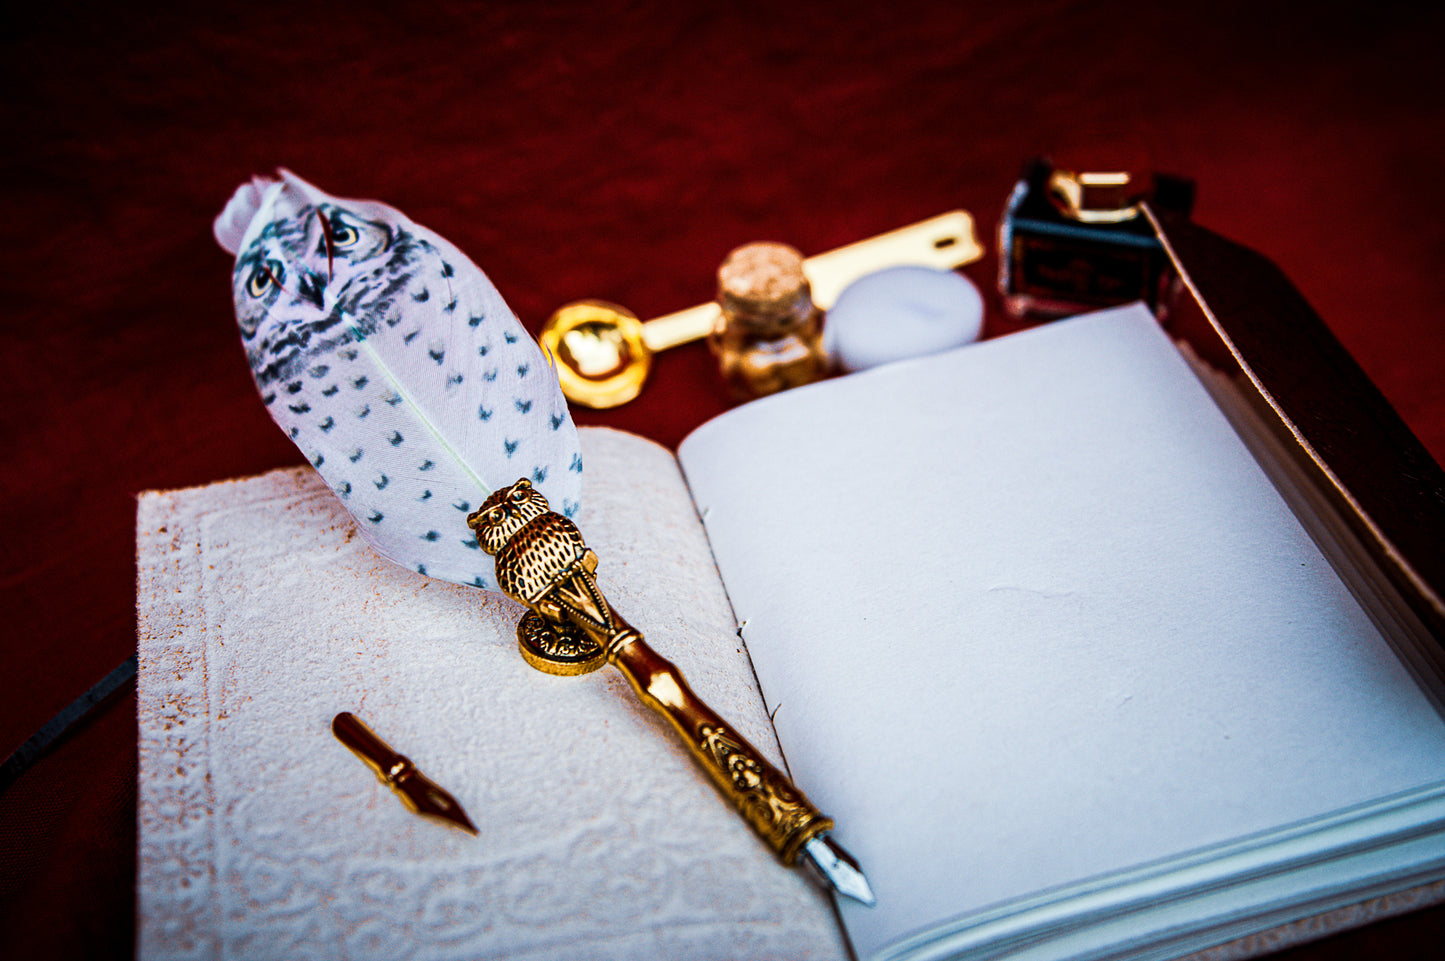 Owl Fountain Pen and Wax Letter Seal Stamp (White Feather)